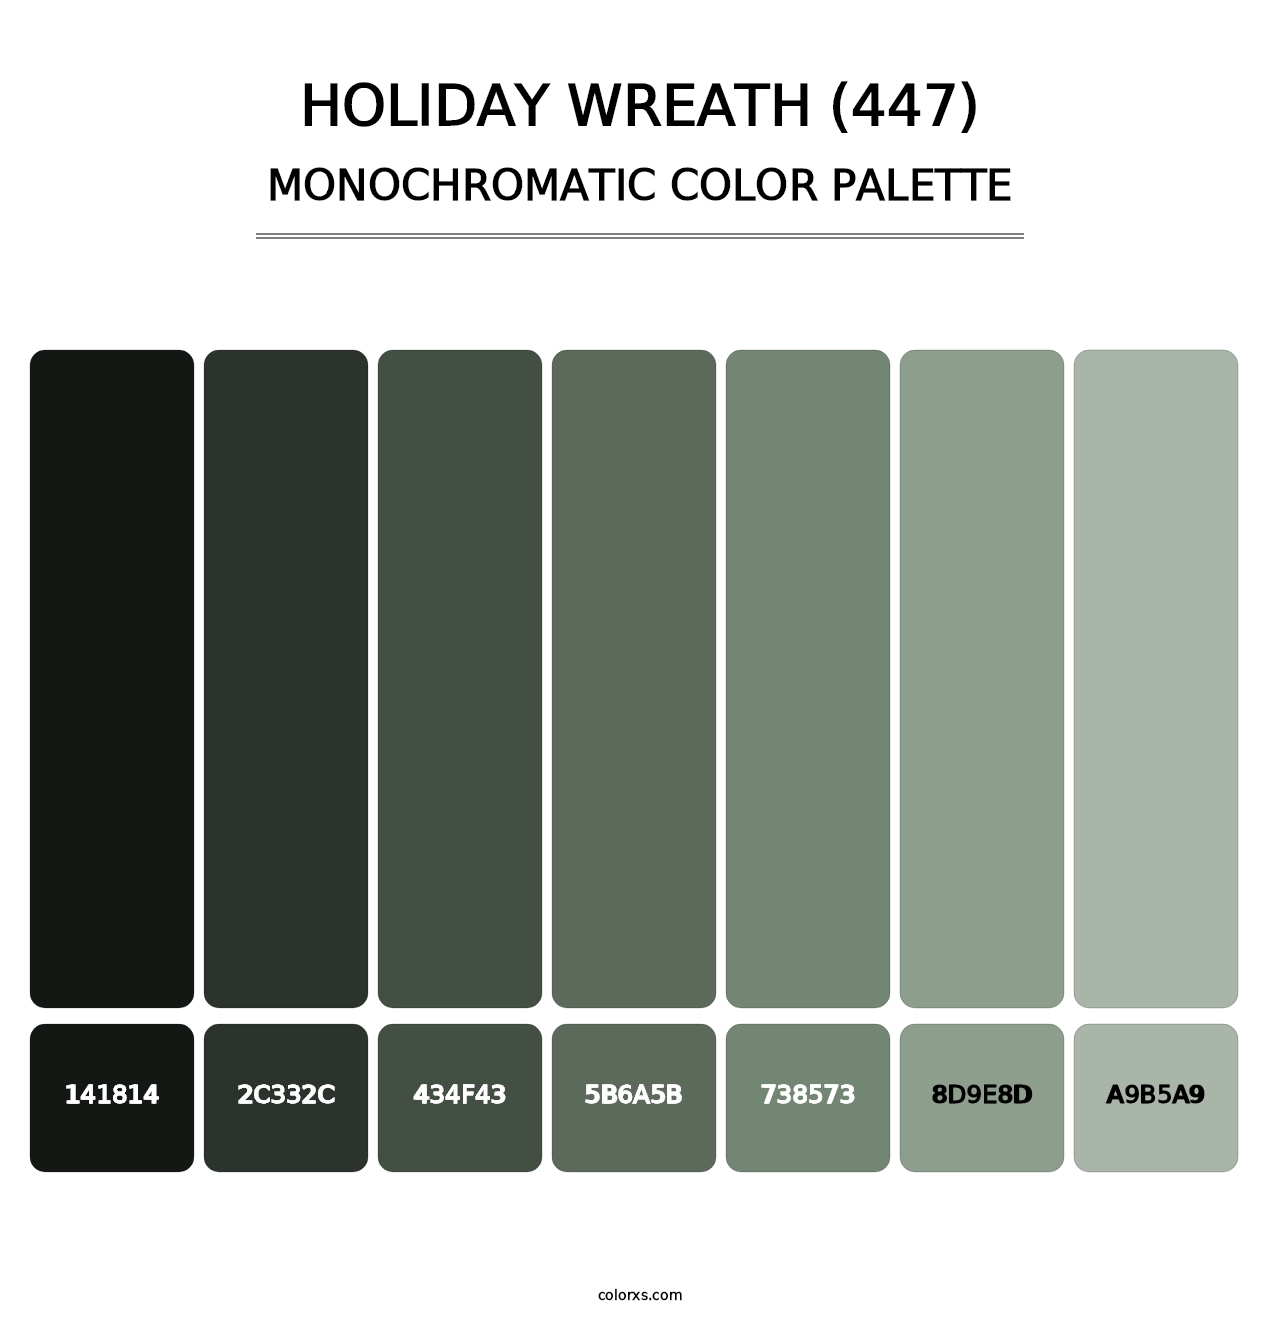 Holiday Wreath (447) - Monochromatic Color Palette